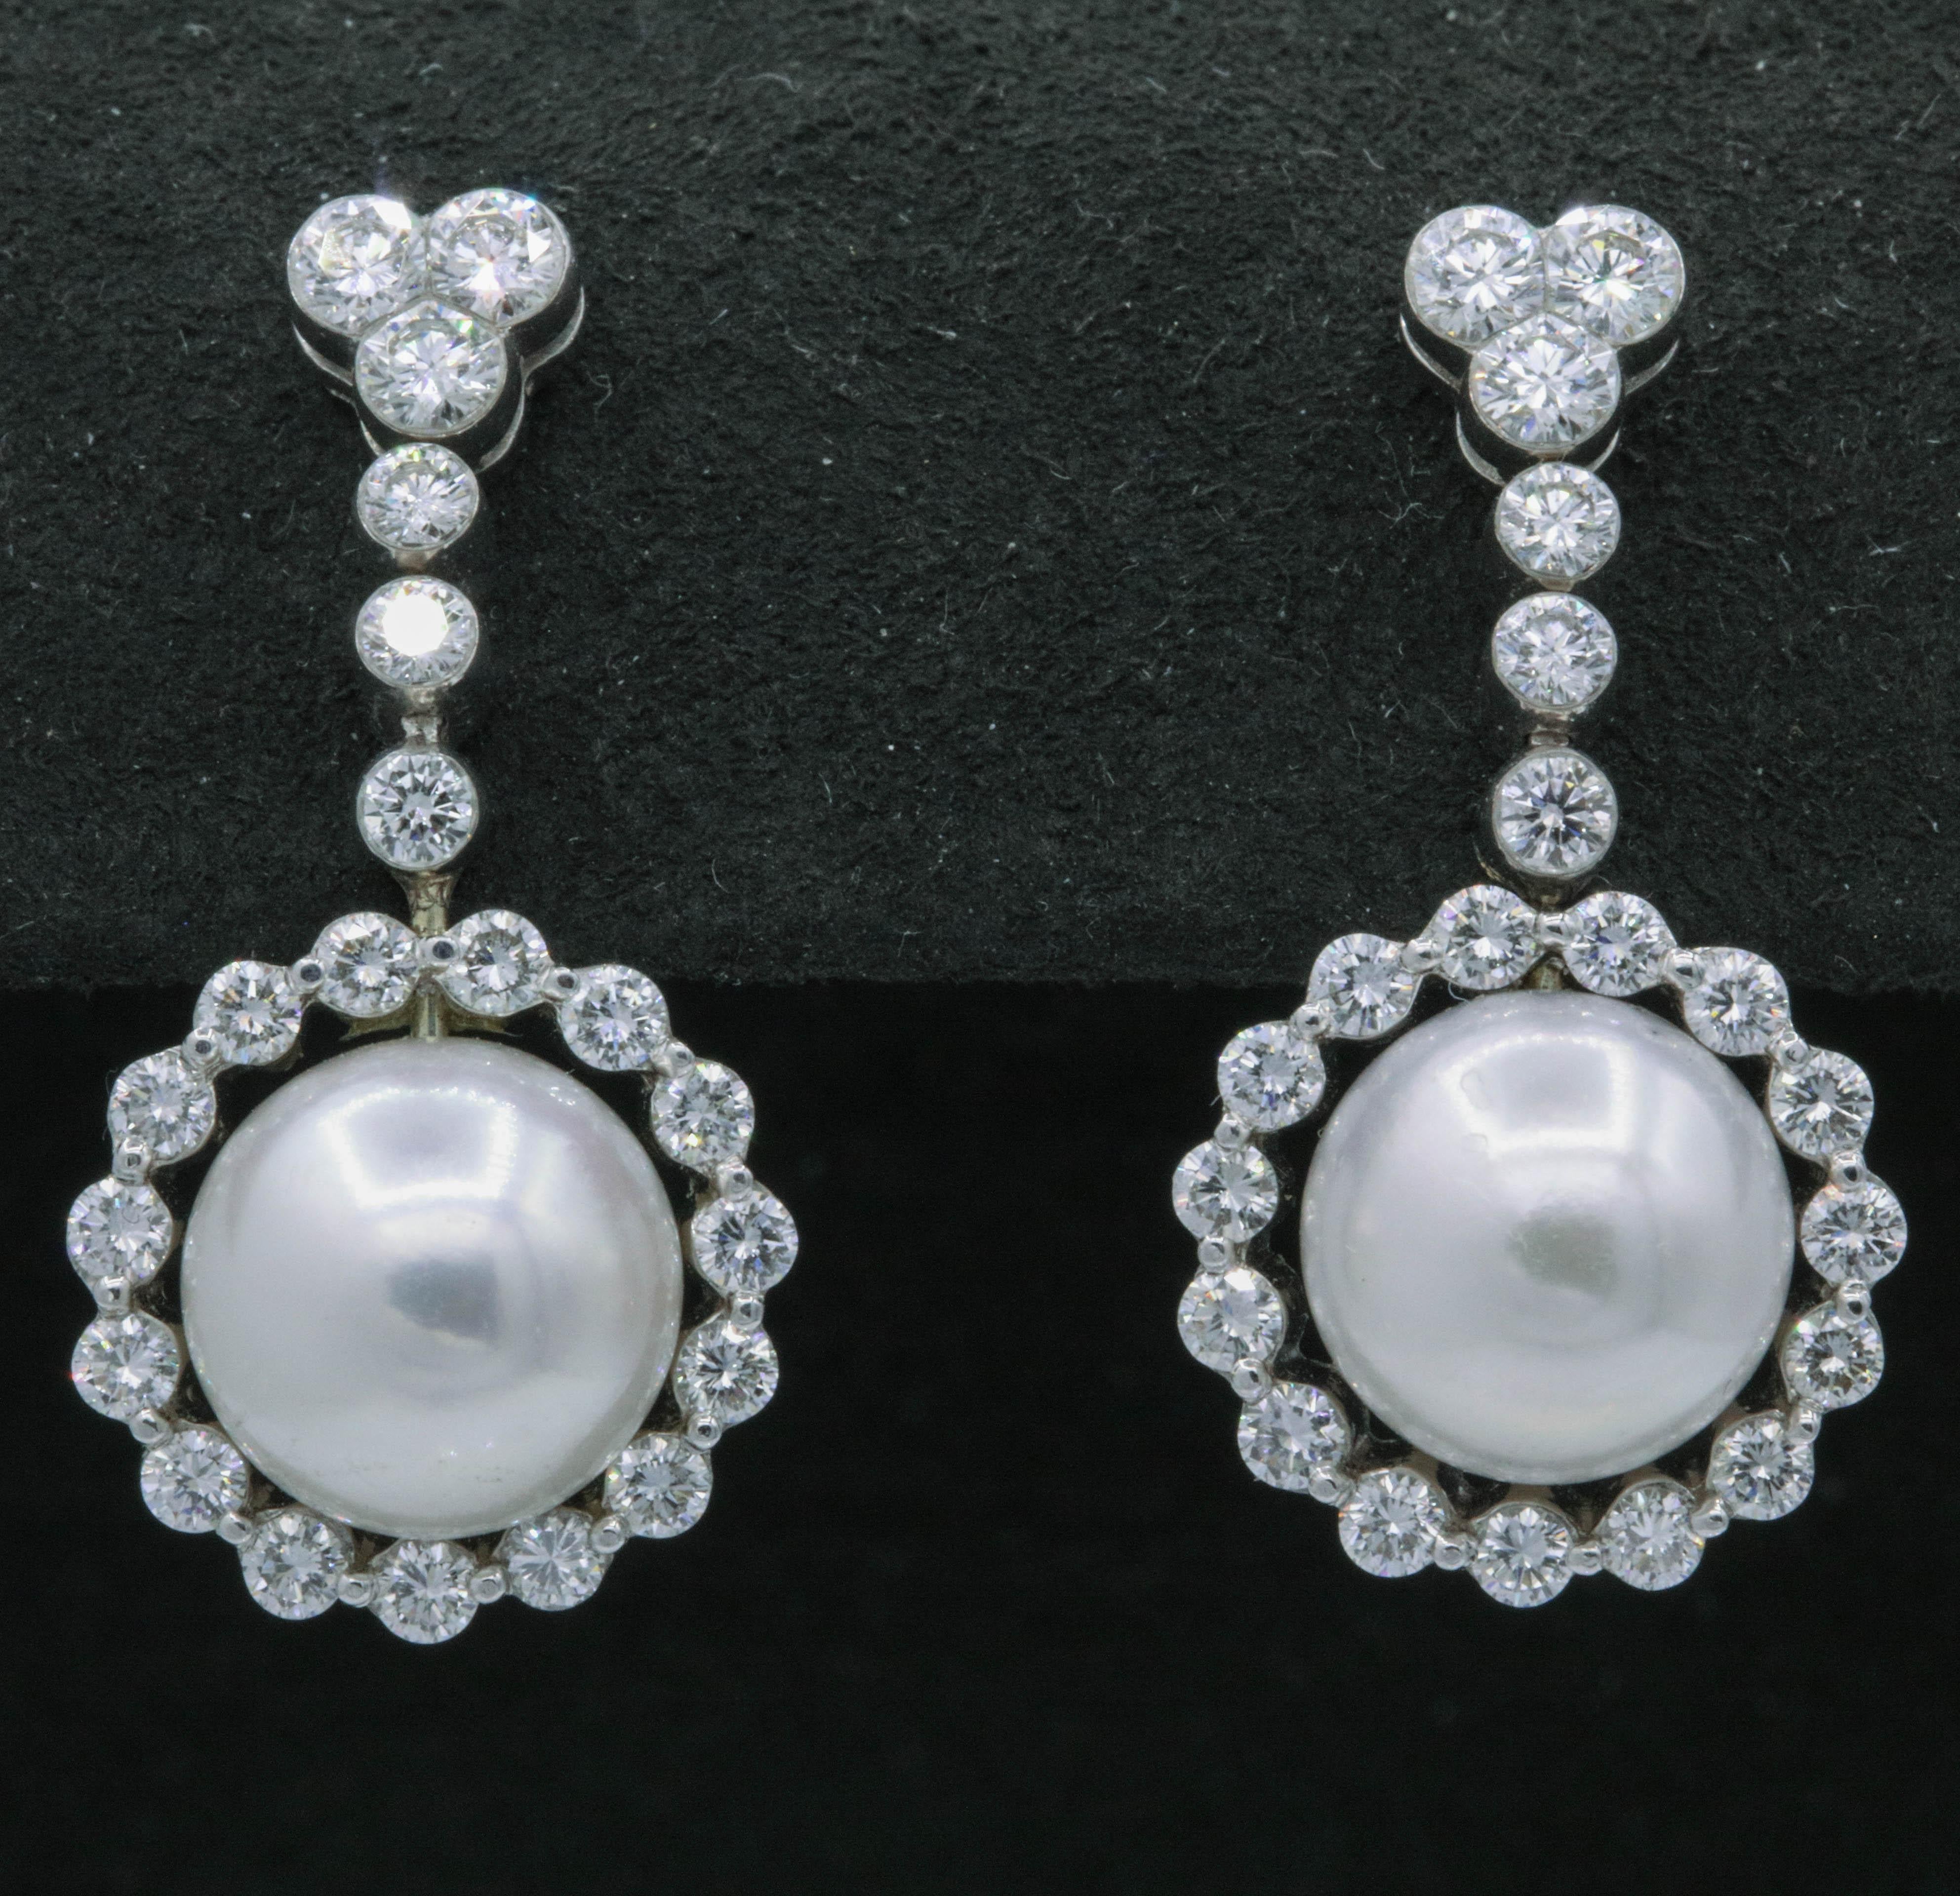 These elegant earrings features two pearls, 9.5 mm, surrounded by 42 round brilliants weighing 1.55 carats, in 18k white gold.  
Color: G-H
Clarity: SI